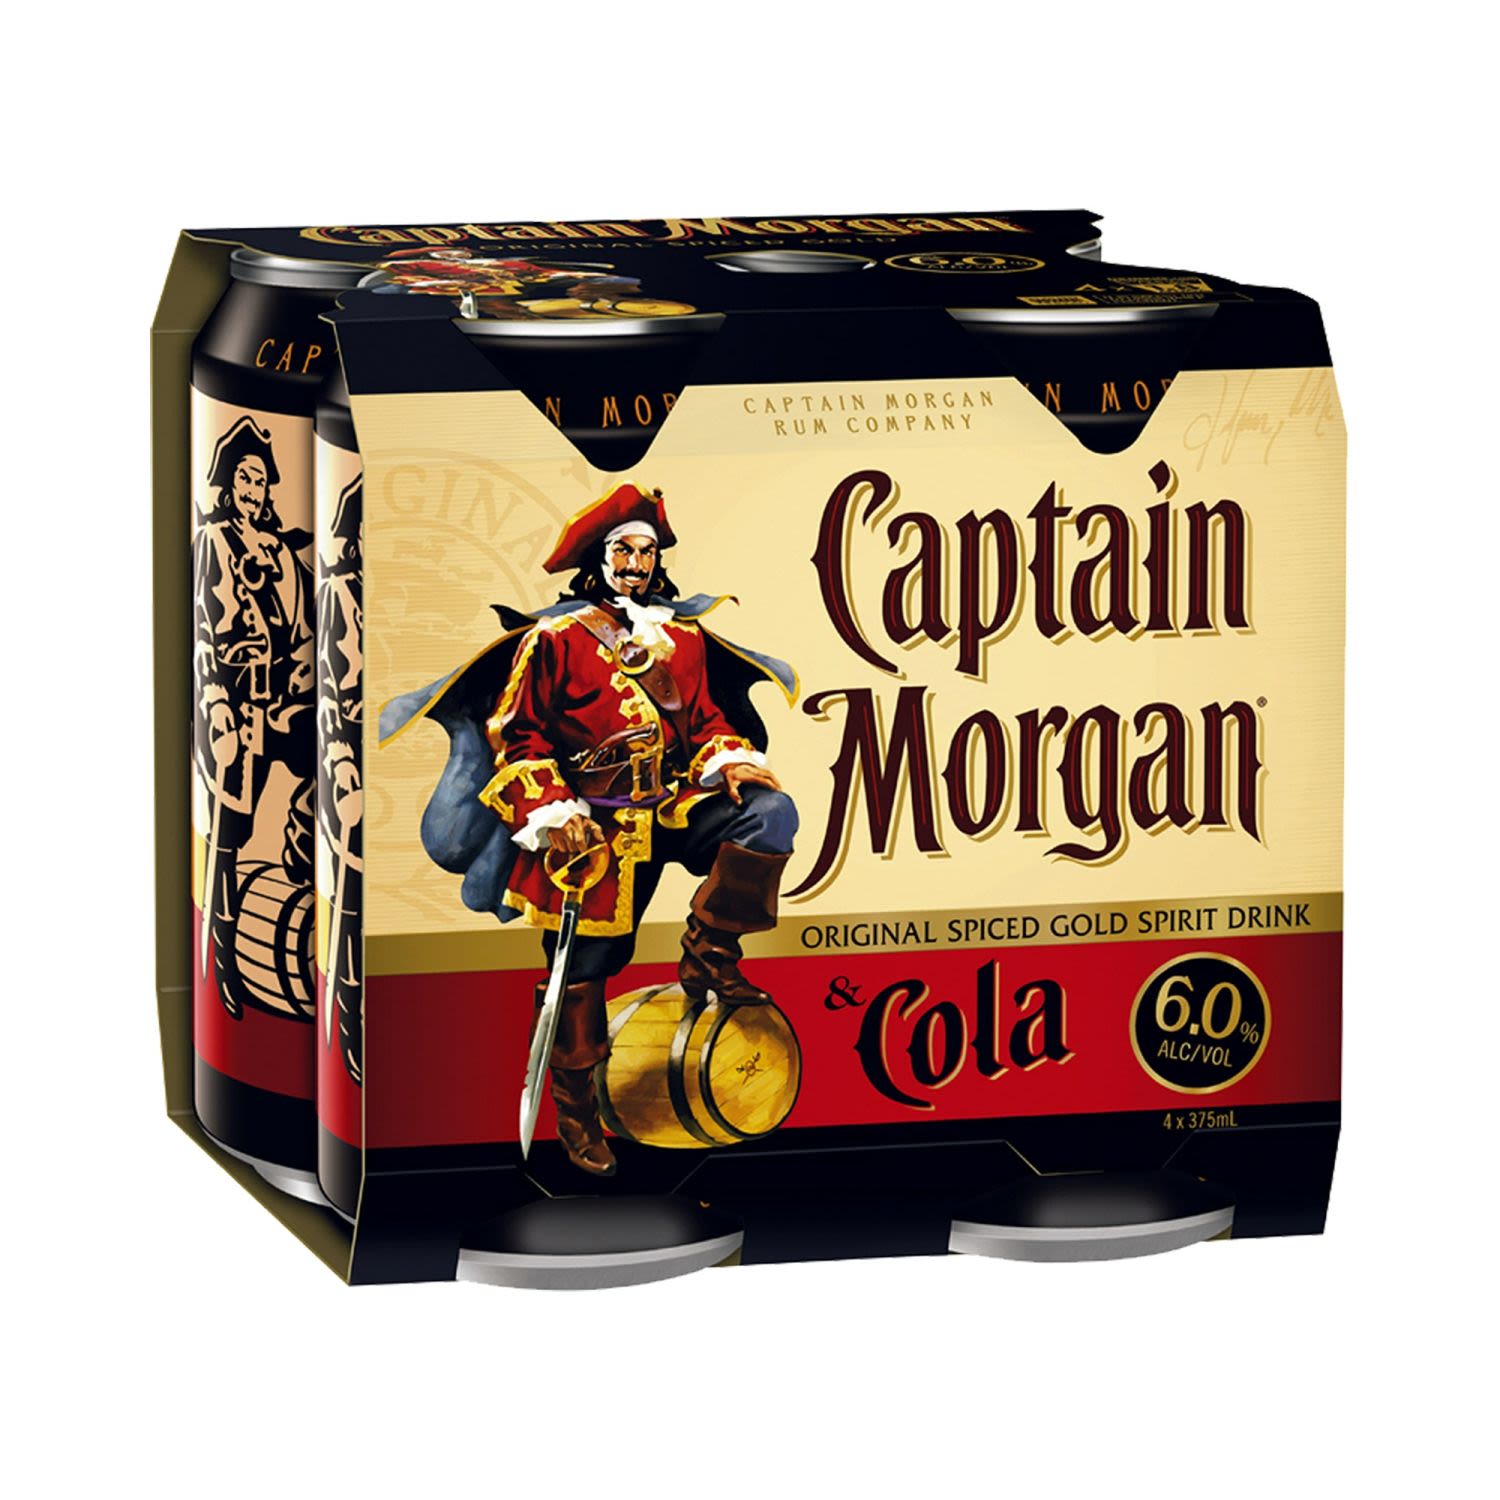 Captain Morgan Original Spiced Gold & Cola 6% Can 375mL 4 Pack